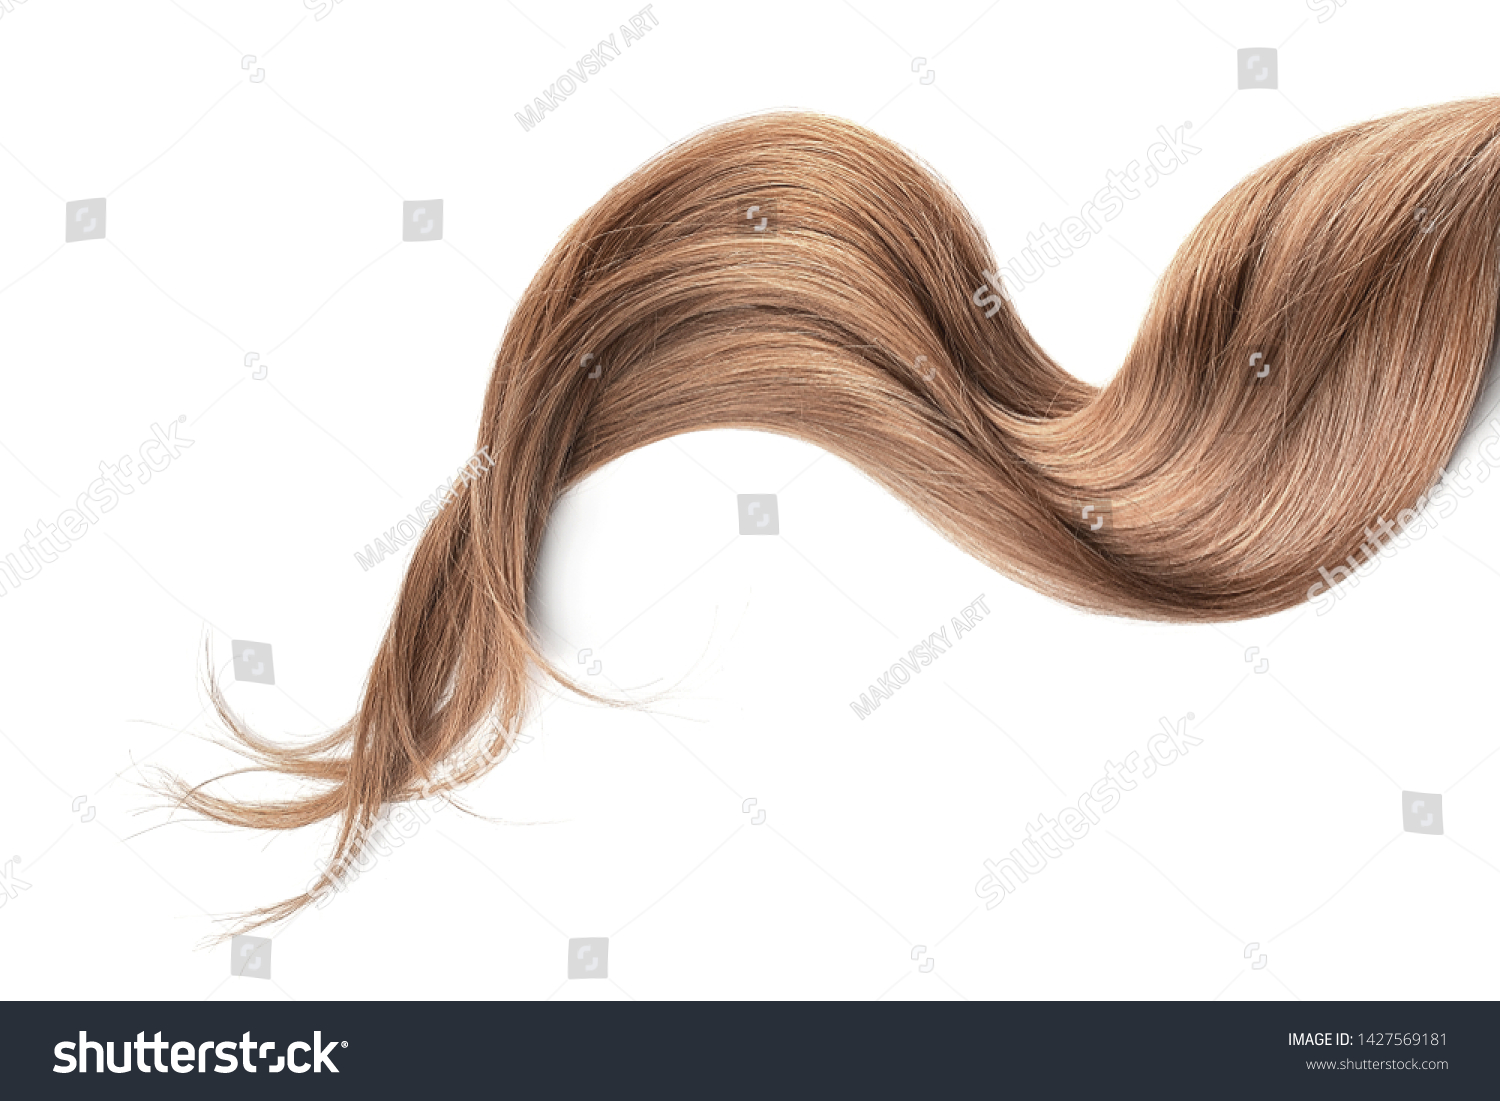 Brown hair isolated on white background. Long wavy ponytail #1427569181